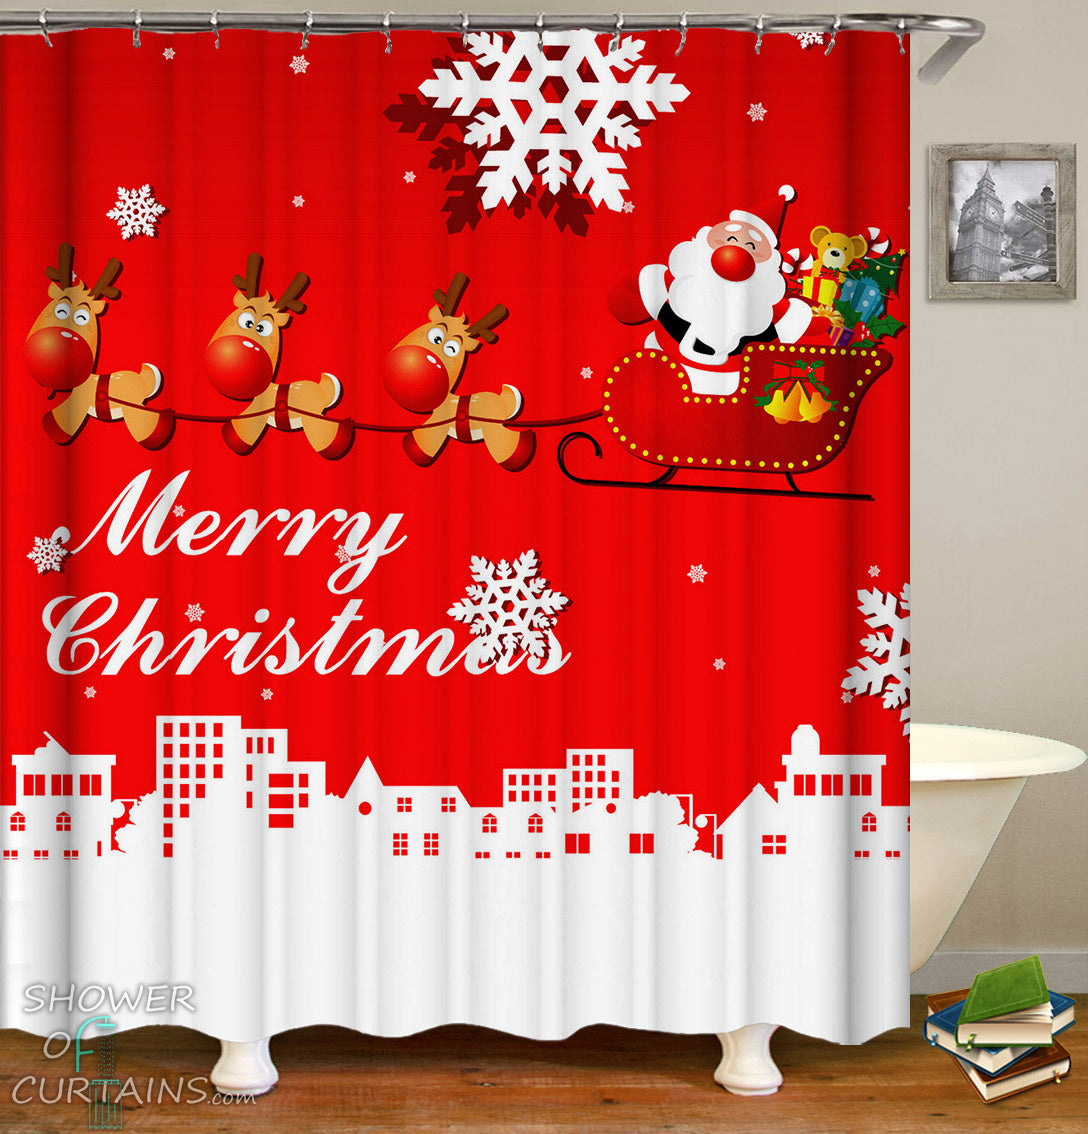 Shower Curtains | Classic Red Merry Christmas – Shower of Curtains